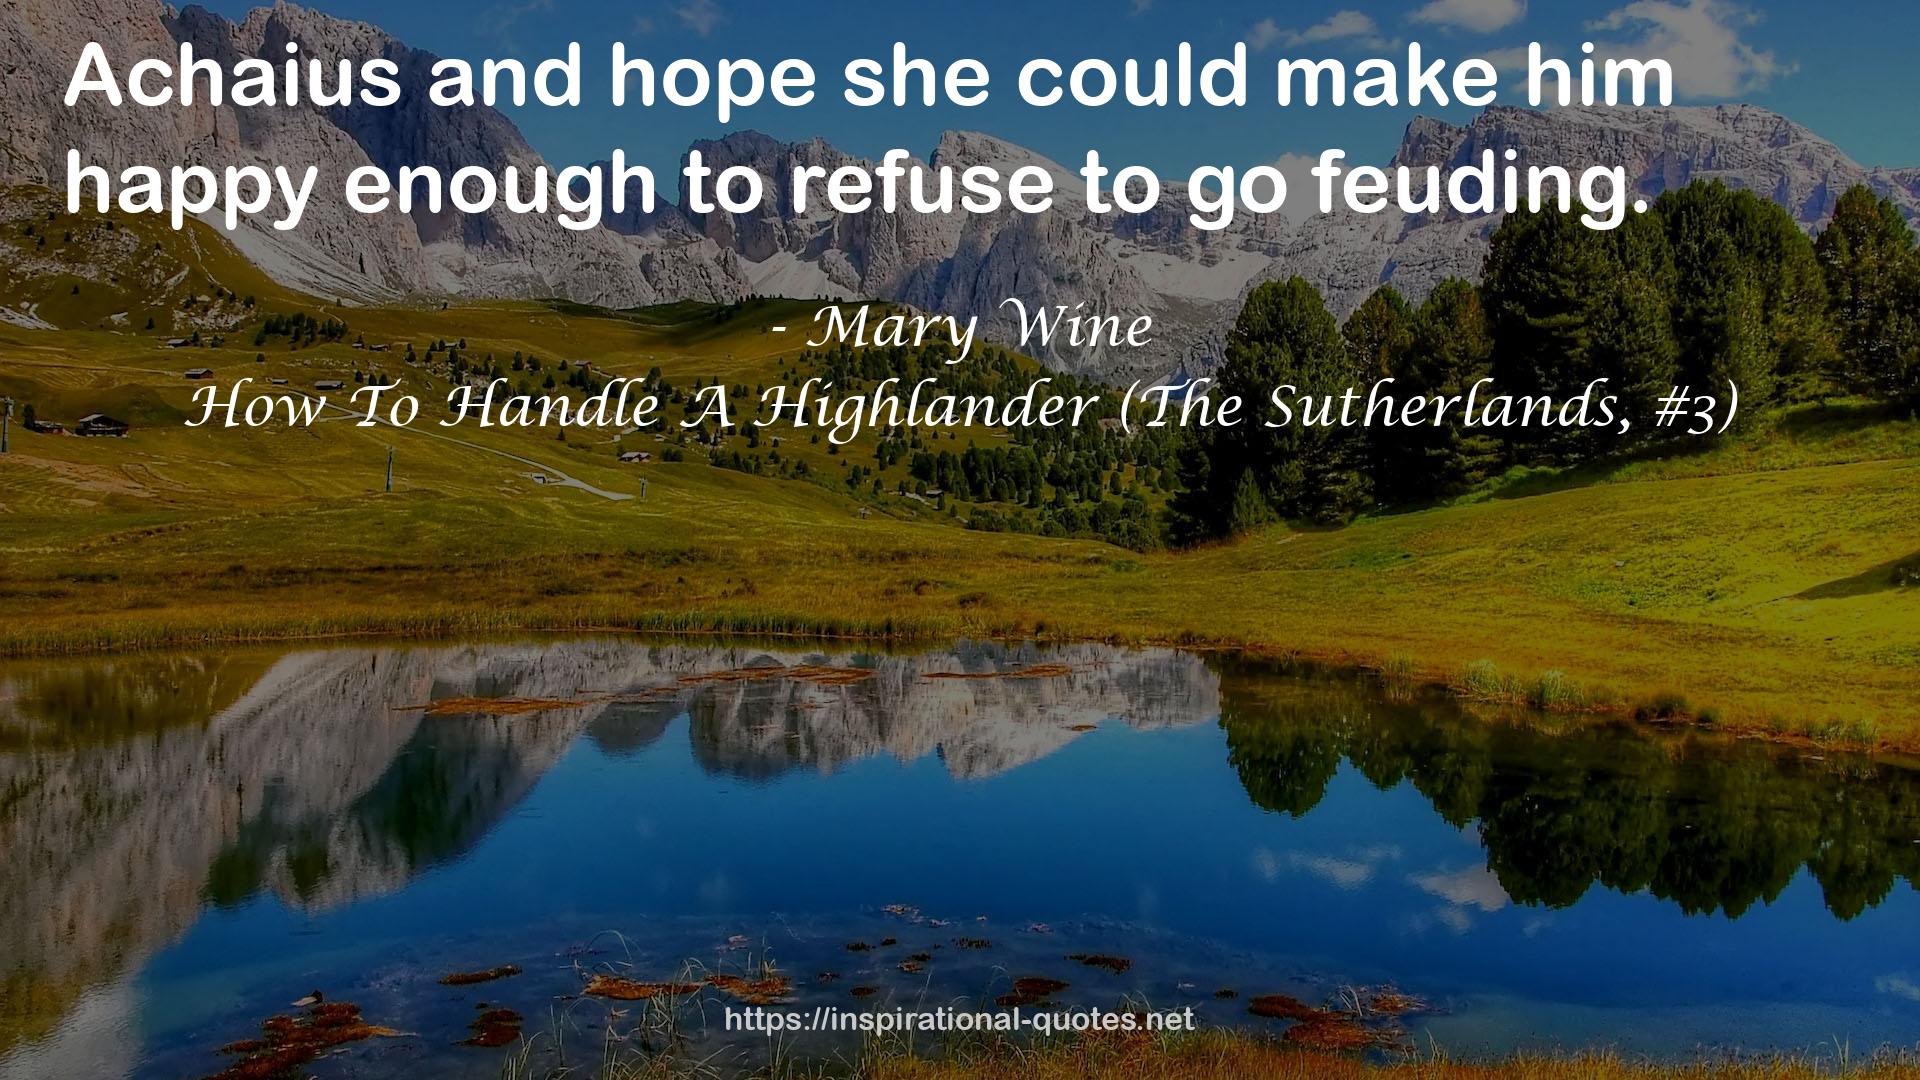 How To Handle A Highlander (The Sutherlands, #3) QUOTES